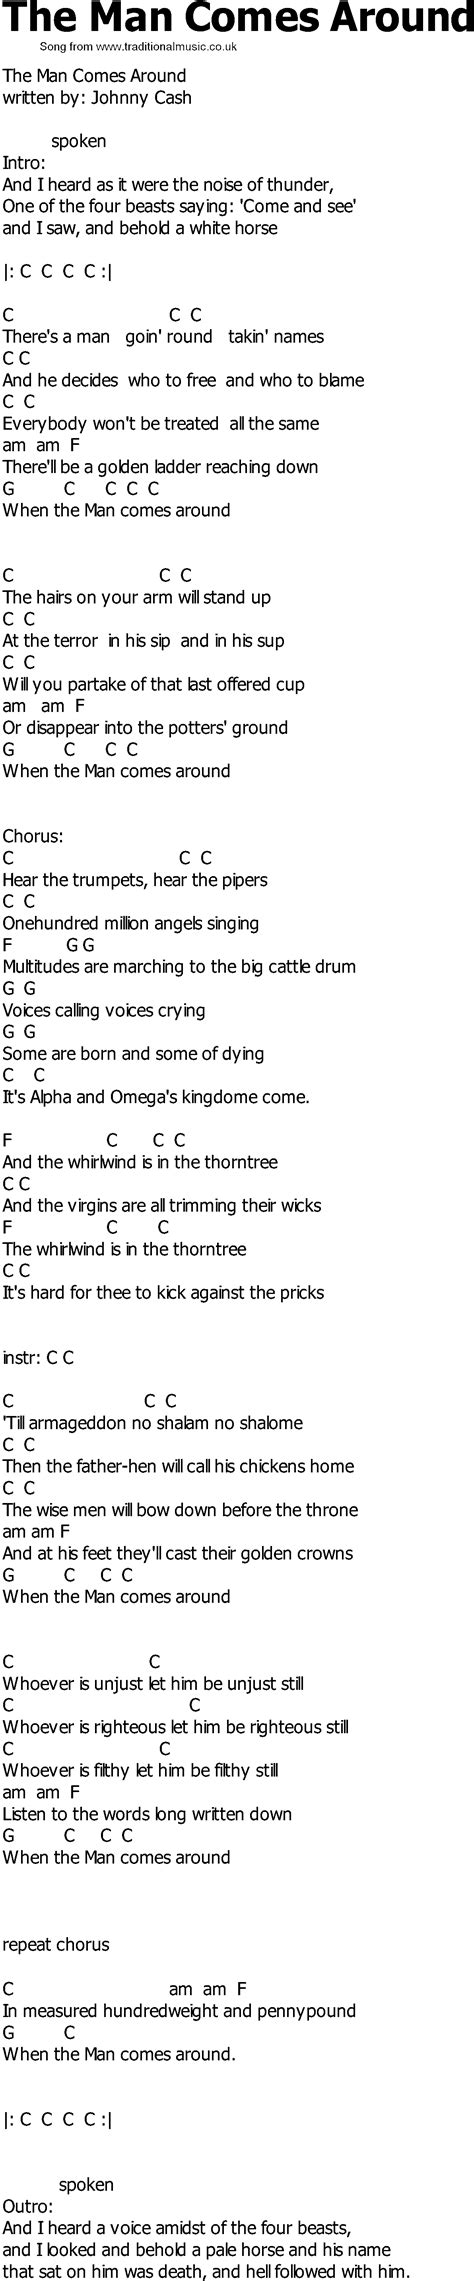 Old Country Song Lyrics With Chords The Man Comes Around